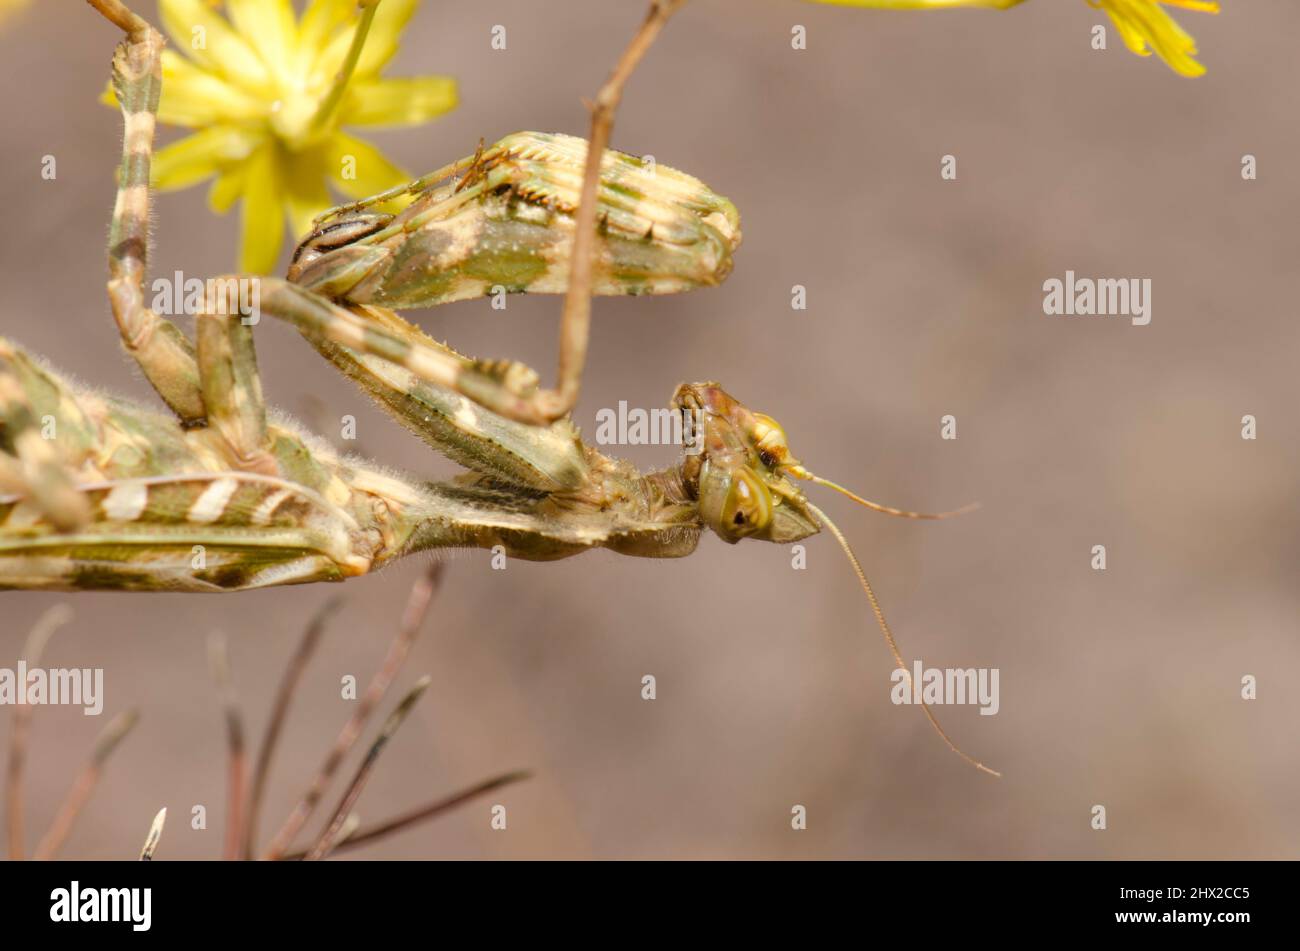 Egyptian flower mantis Blepharopsis mendica. Integral Natural Reserve of Inagua. Gran Canaria. Canary Islands. Spain. Stock Photo